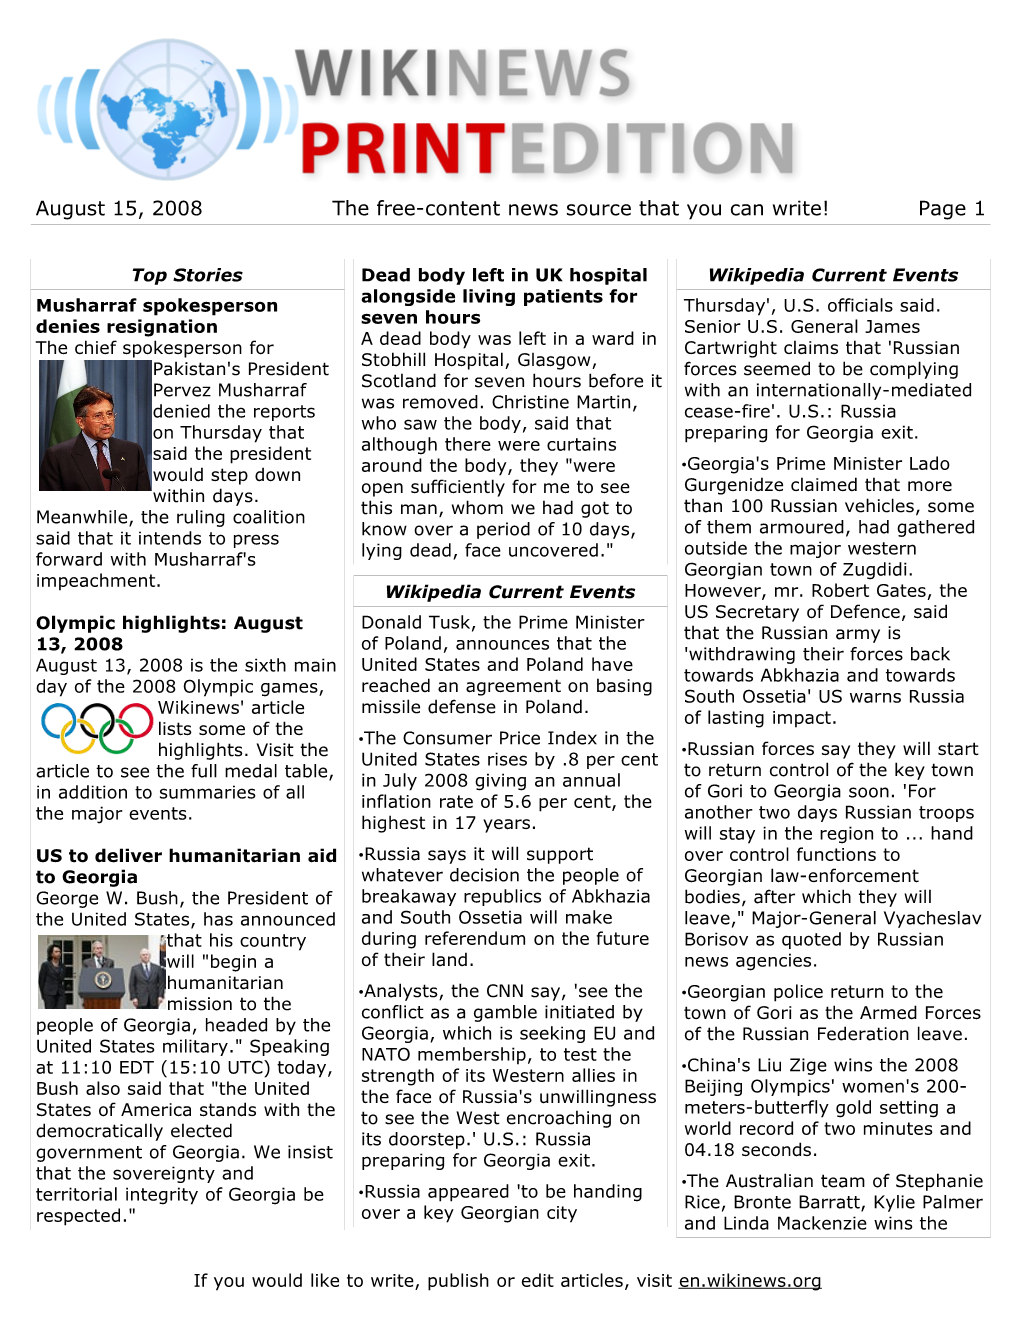 August 15, 2008 the Free-Content News Source That You Can Write! Page 1